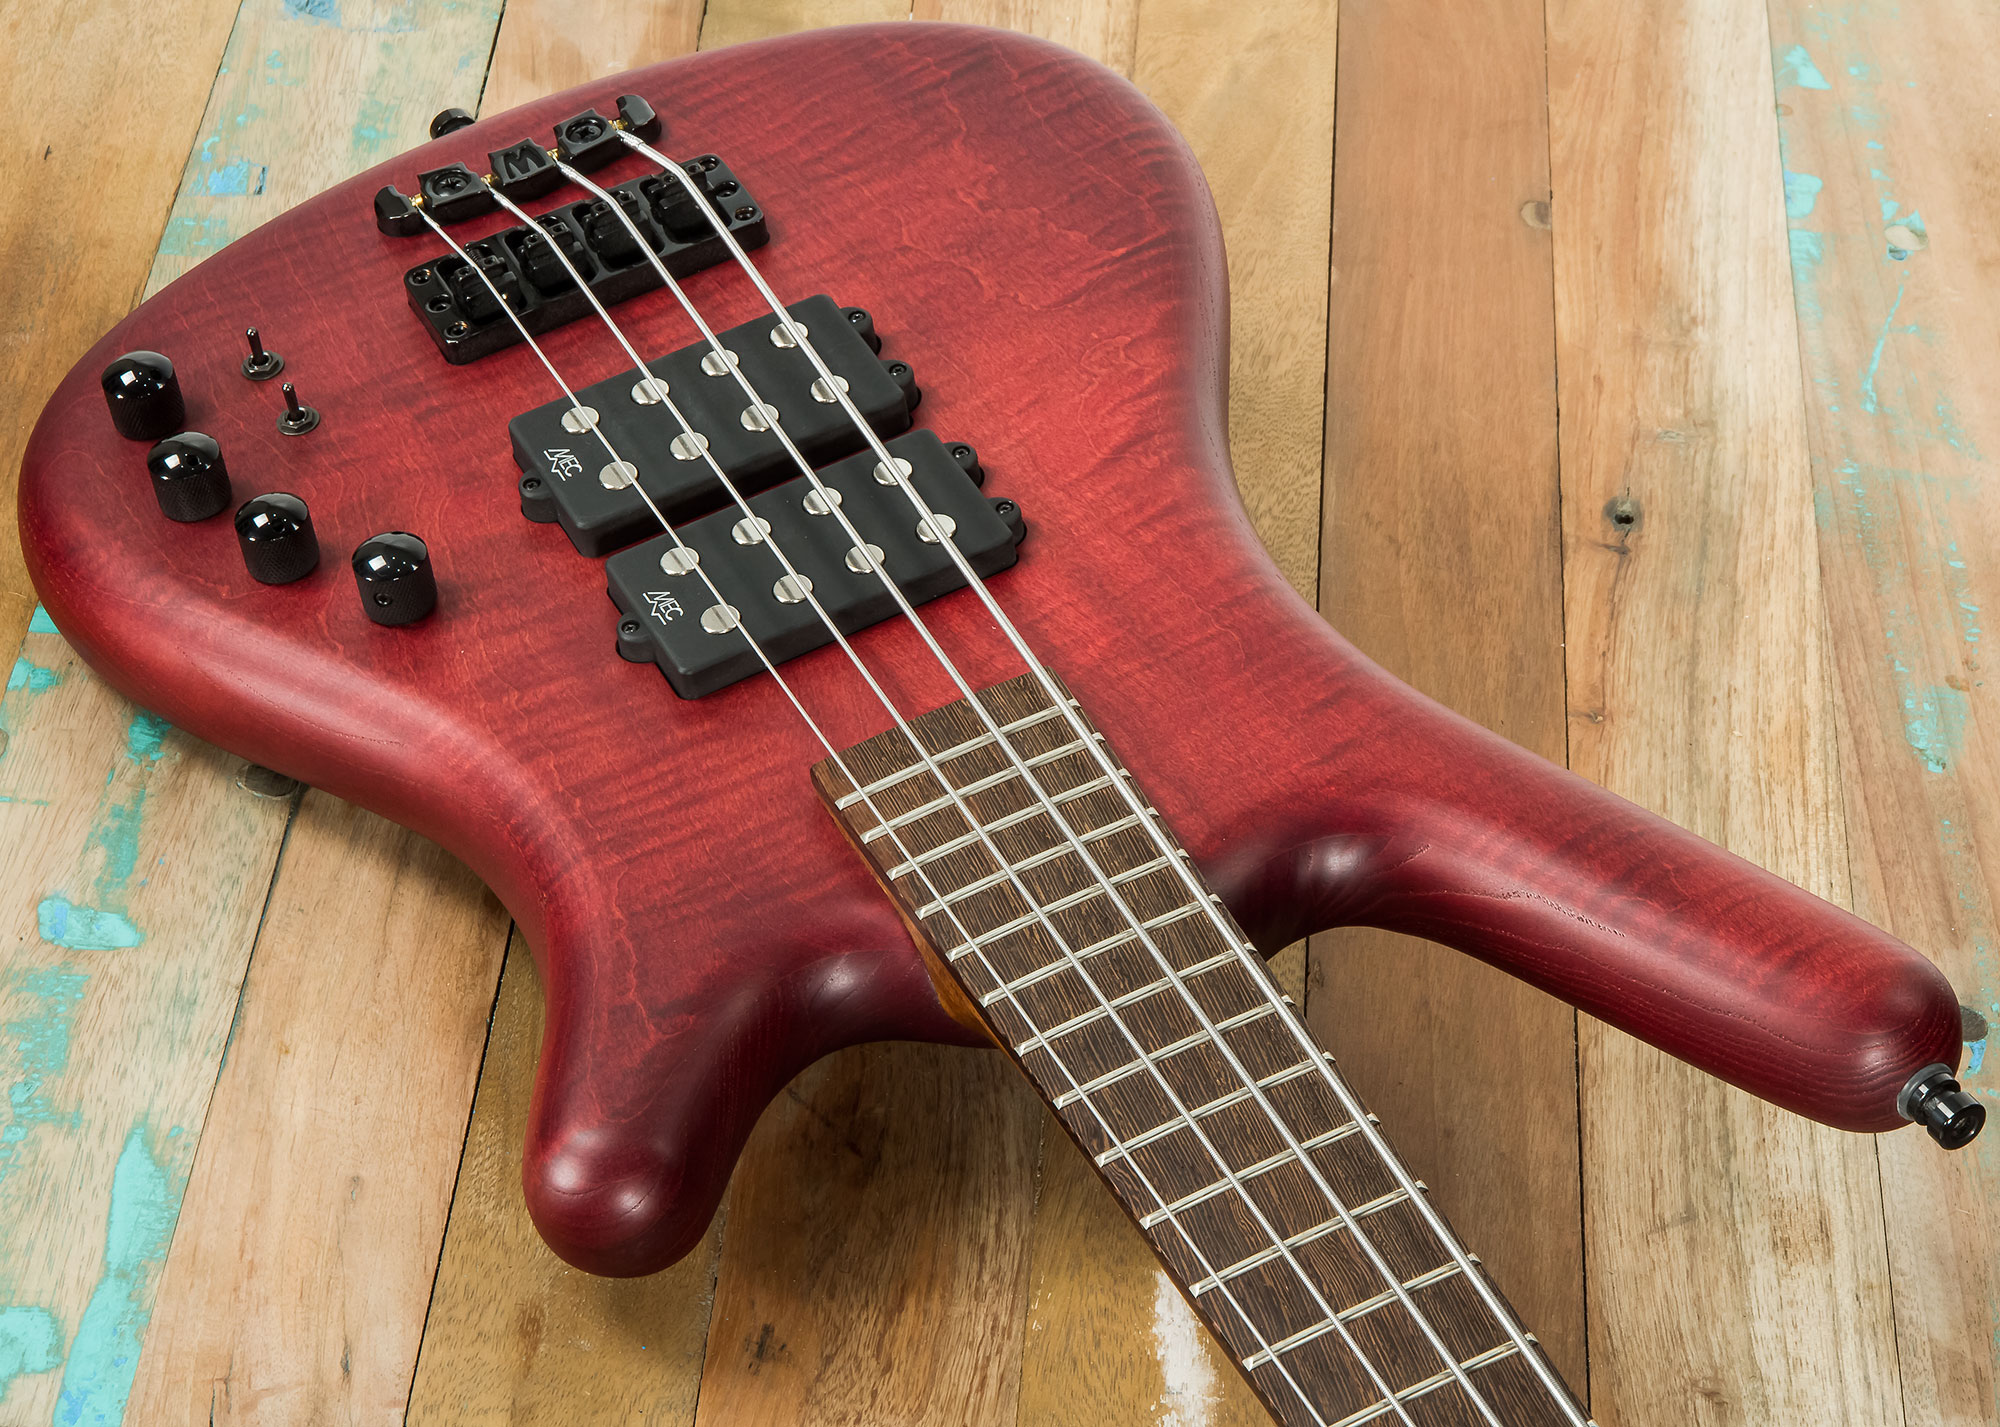 Warwick Corvette $$ 4c Pro Gps Maple Top Ltd All Active Wen - Burgundy Red Transparent Satin - Solid body electric bass - Variation 2